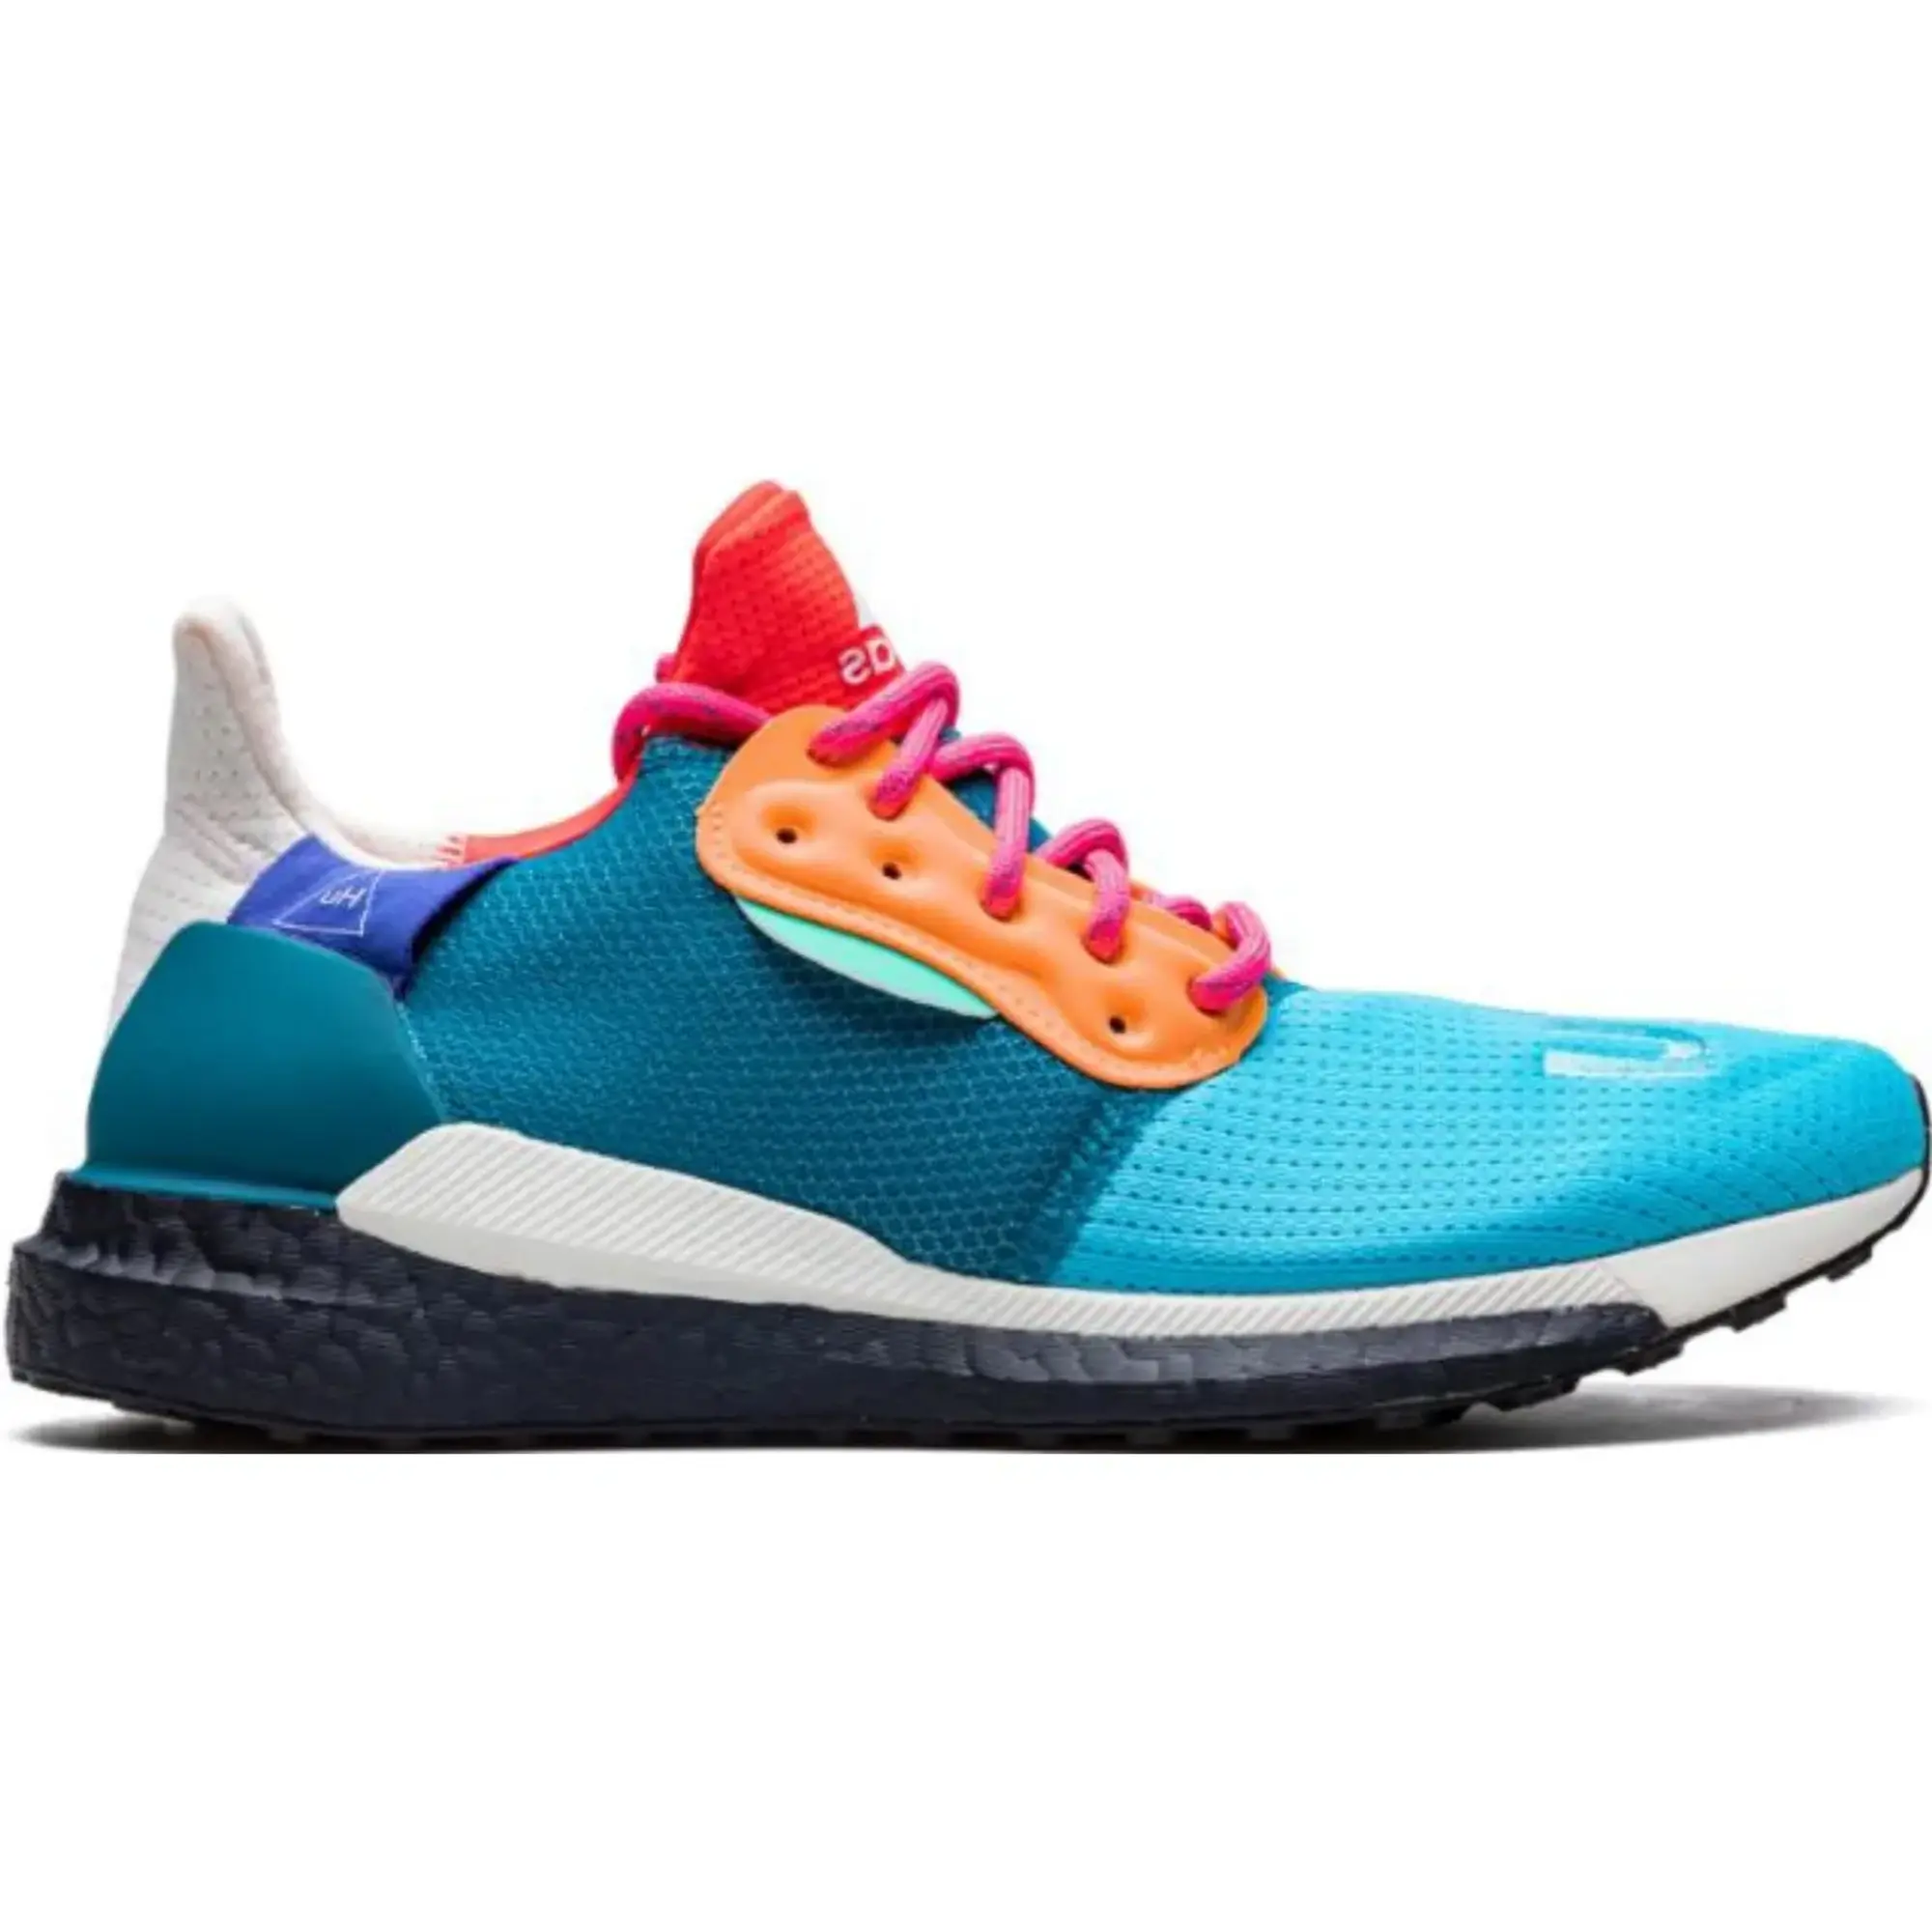 adidas PW SITW SOLARHU Something In The Water Shoes